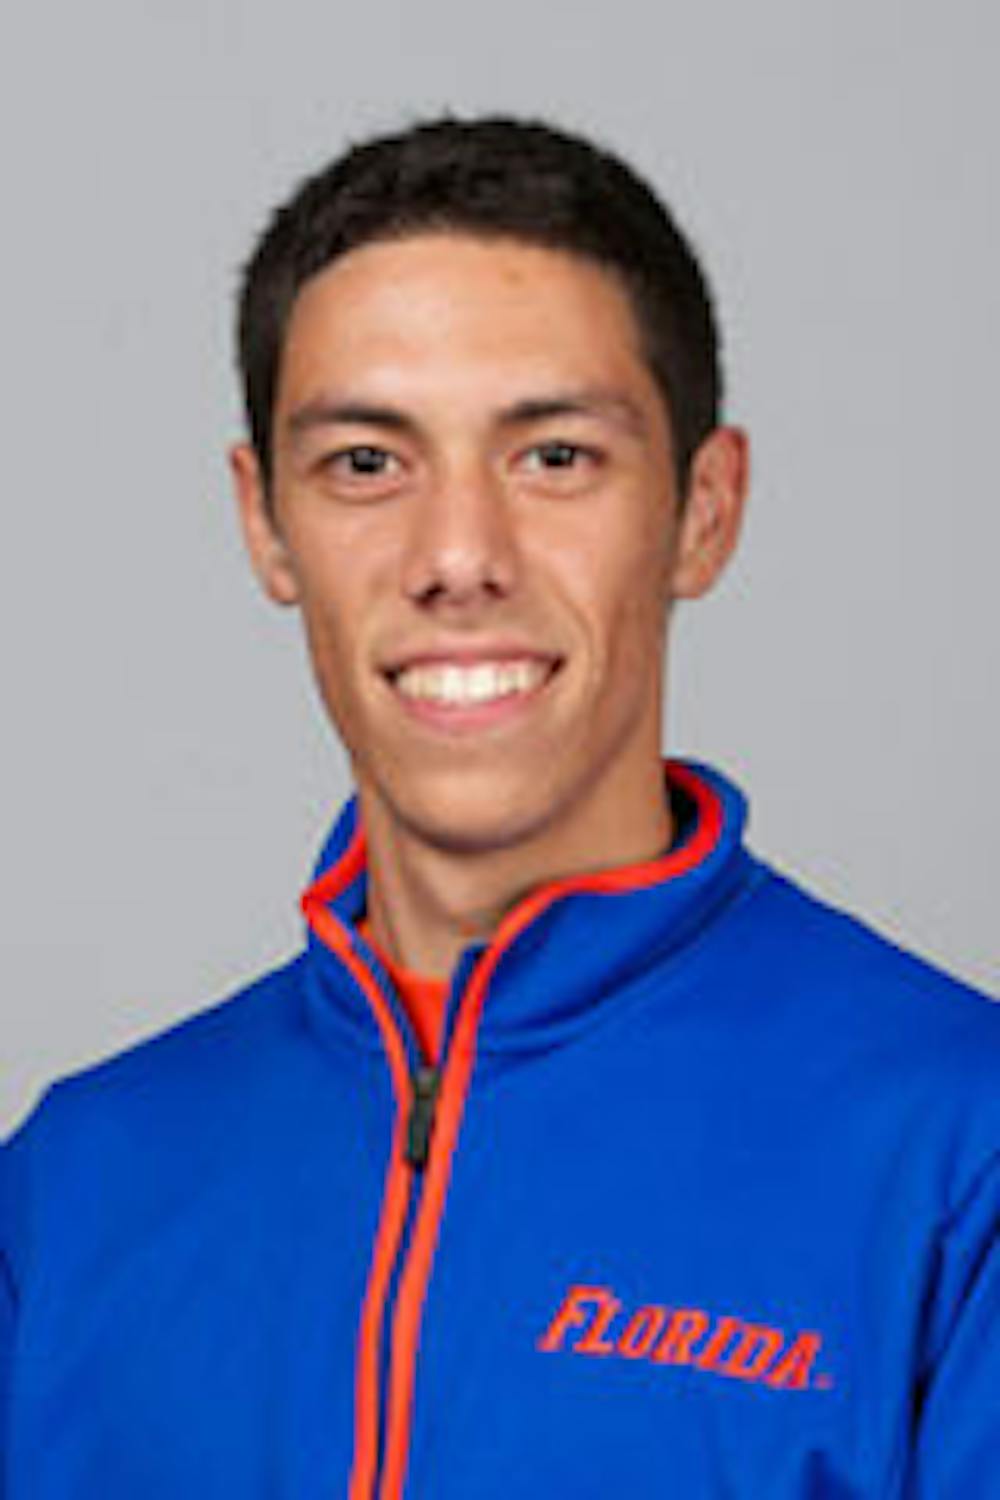 <p>Freshman runner Carlos Miranda (above) earned&nbsp;his first collegiate victory on Friday at the Wisconsin adidas Invitational&nbsp;in the 5K with a time of 15:17.60.&nbsp;</p>